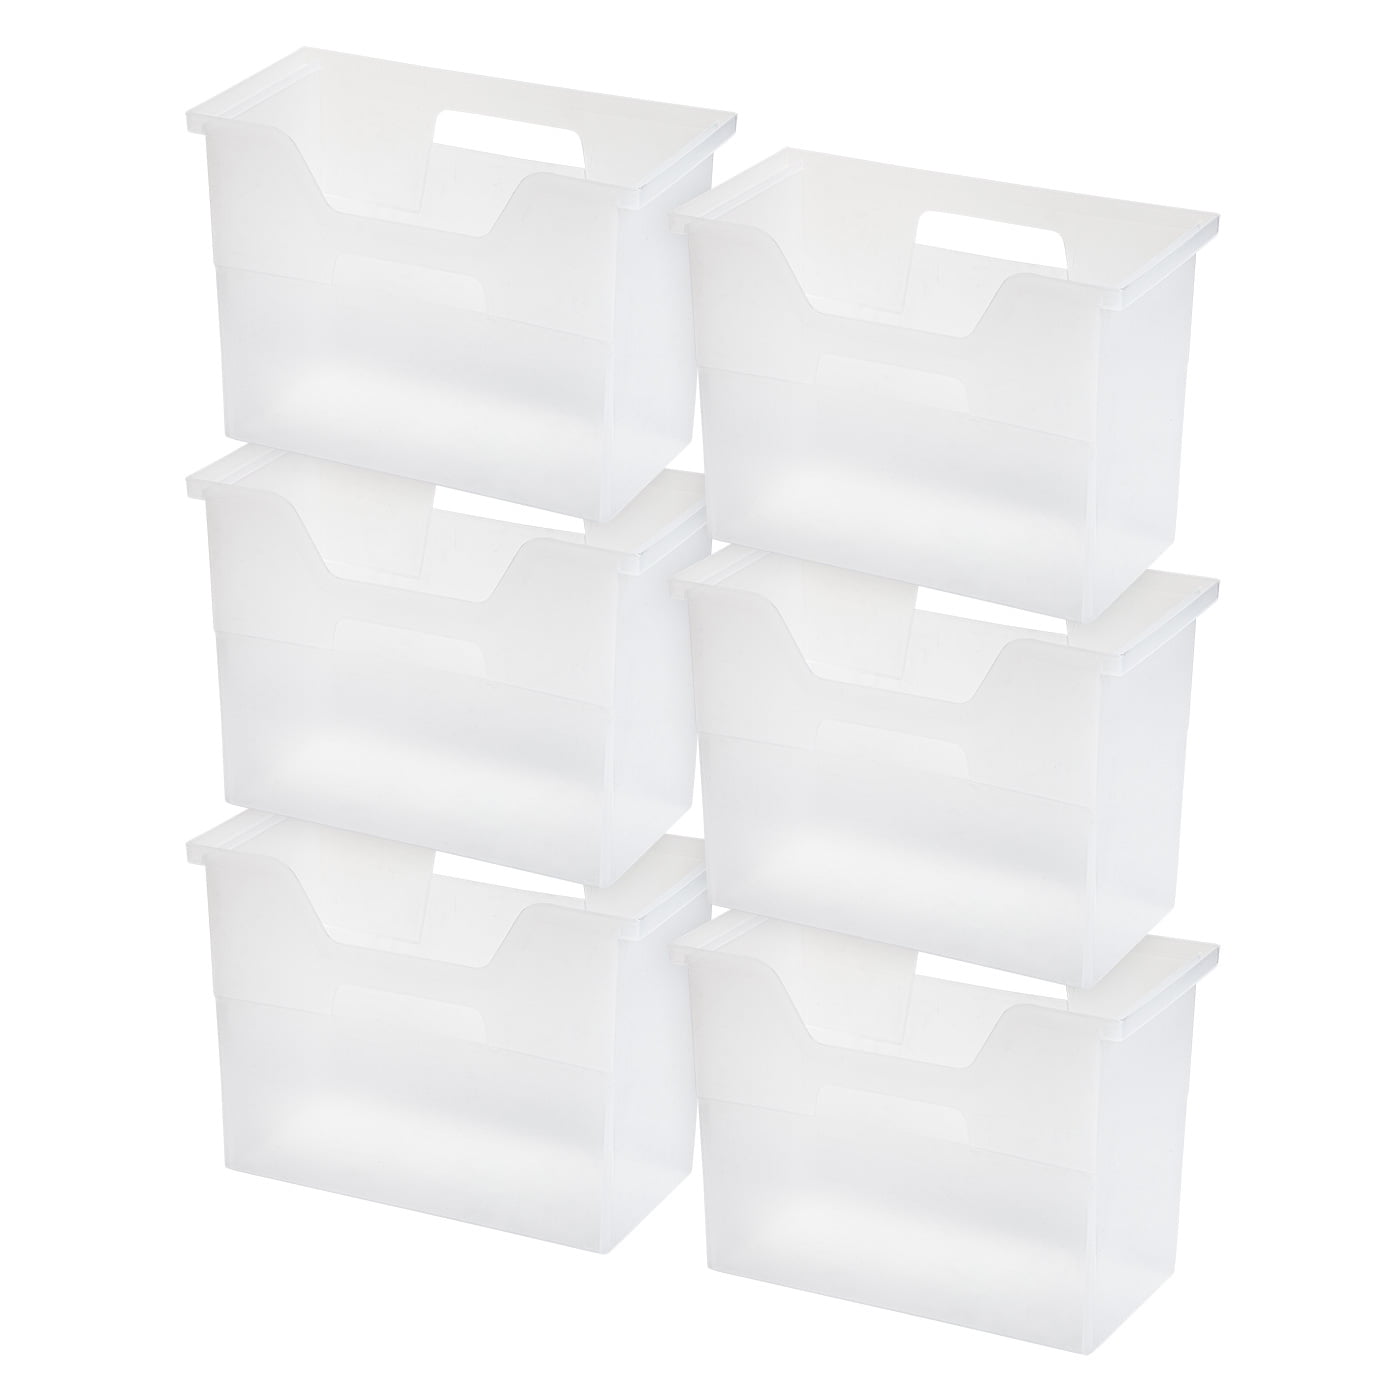 Iris Letter Size File Box Storage, 5 Pack, Clear